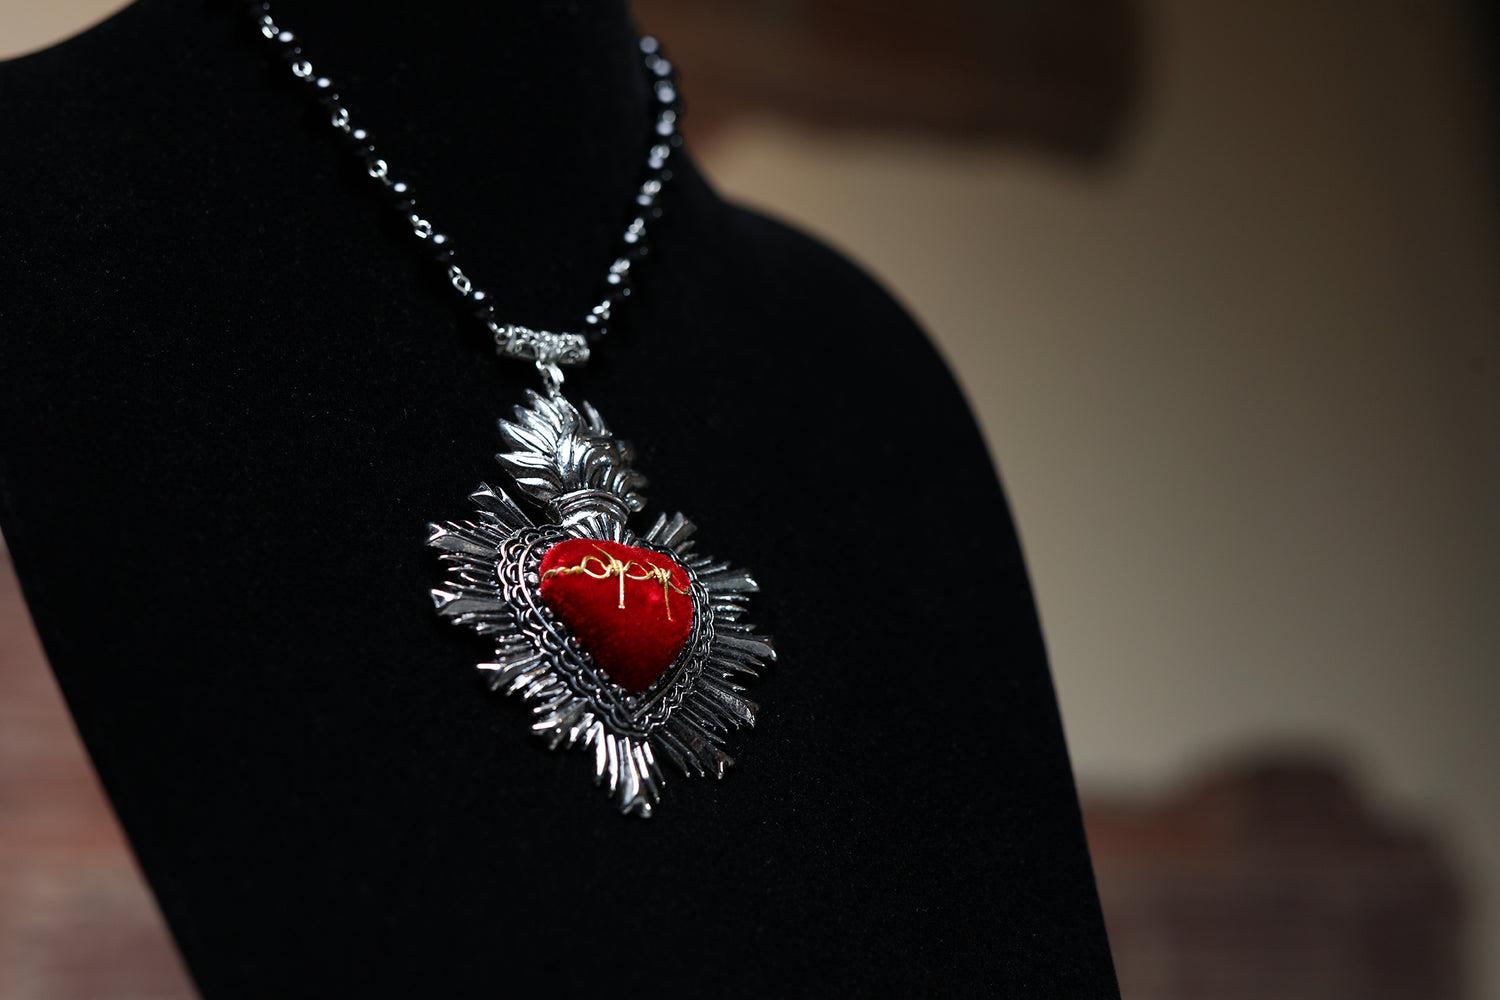 Red and silver cultural fashion necklace. the center is red and has a golden ornament, the chain is made with black and silver stones